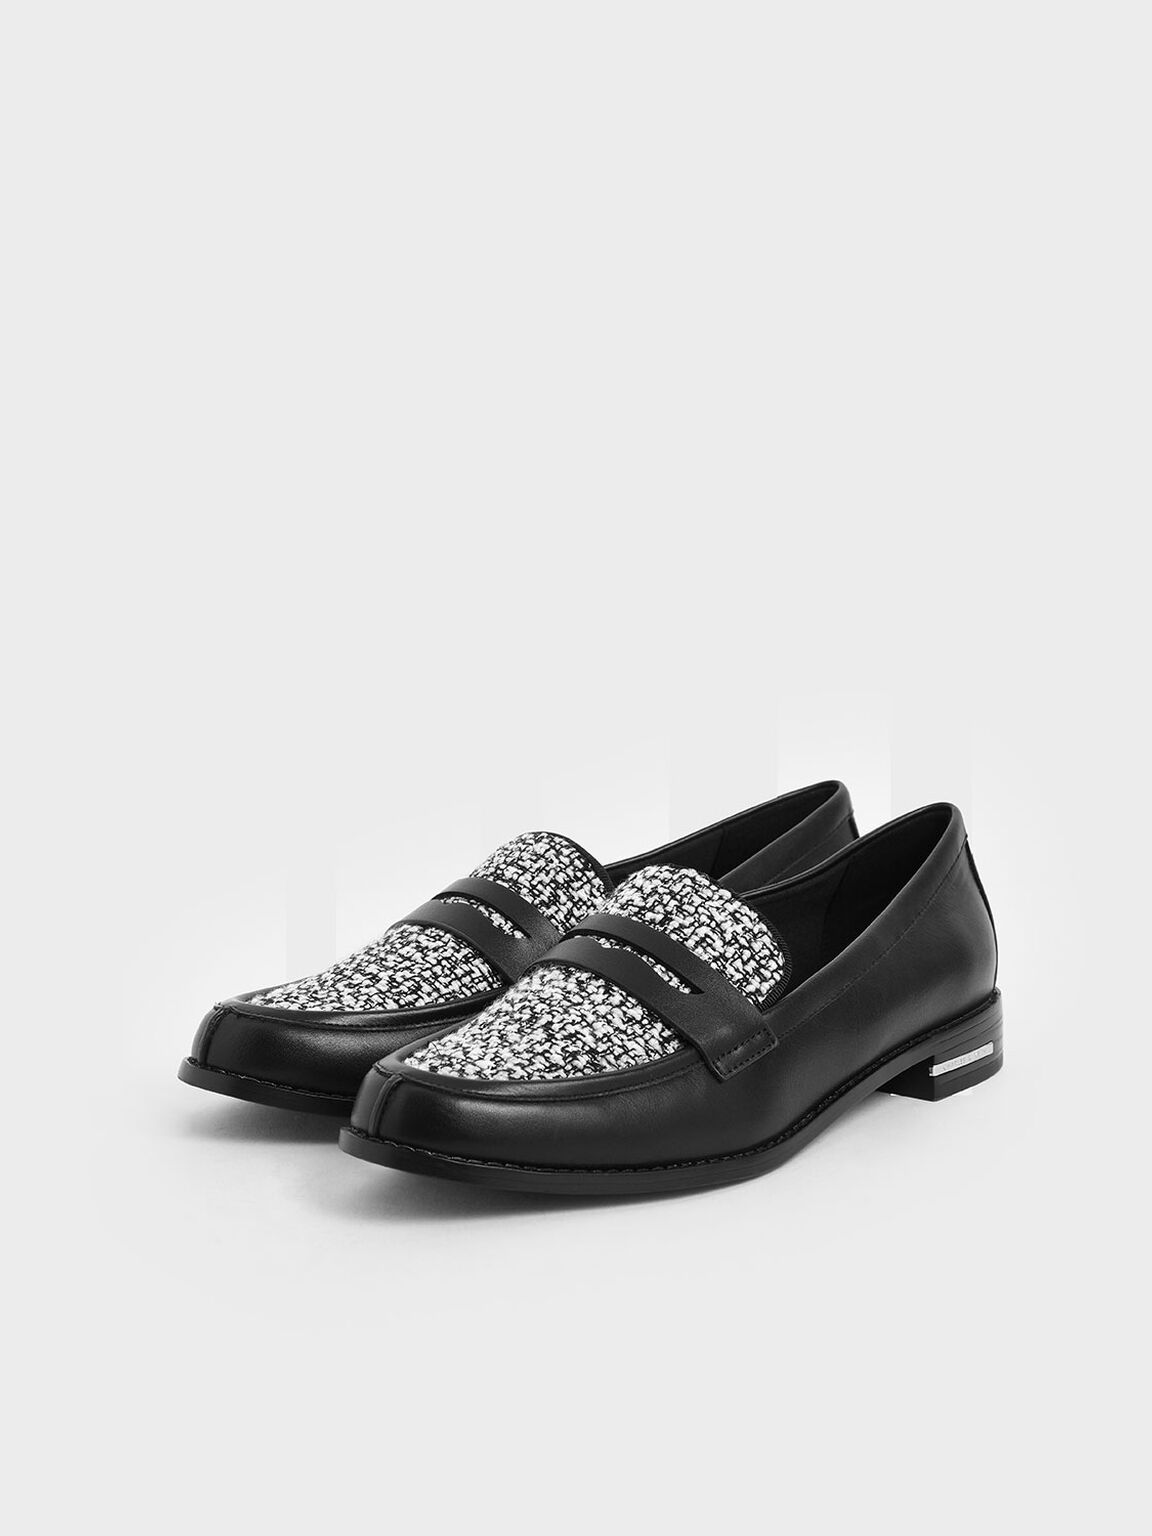 Classic Tweed Penny Loafers, Multi, hi-res